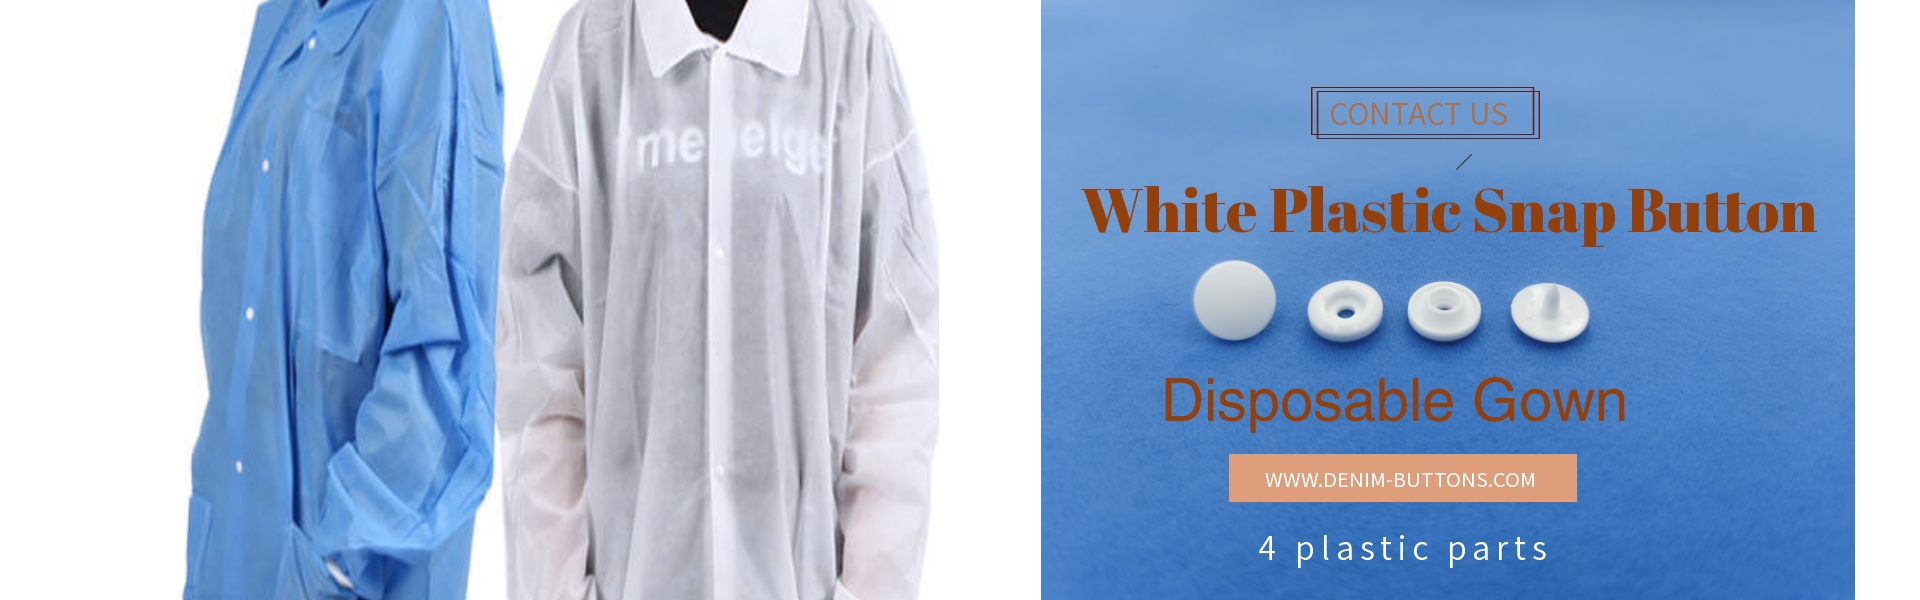 WHITE PLASTIC SNAP BUTTONS